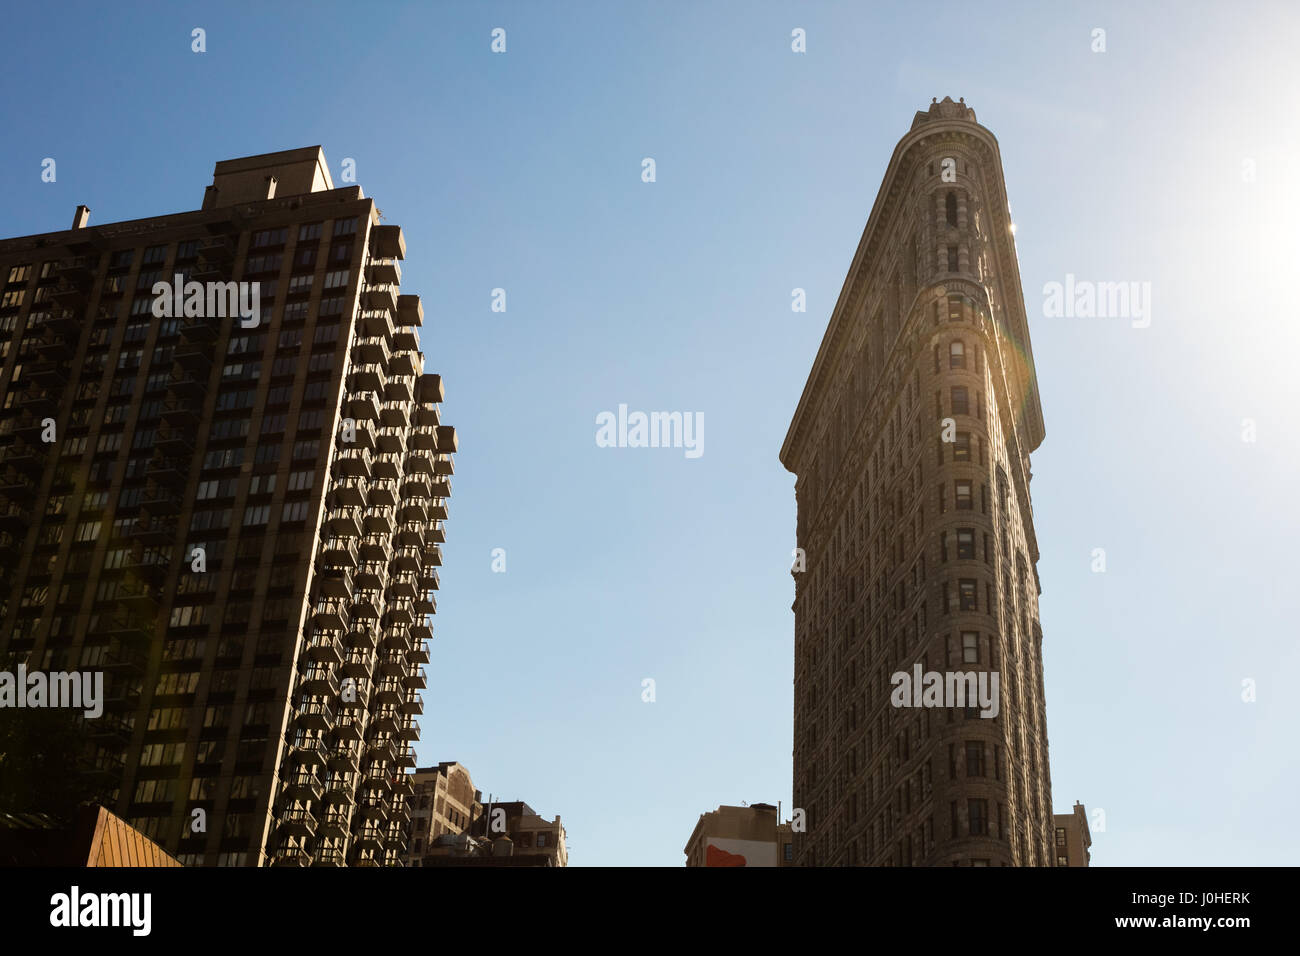 Low Angle Architectural Exterior View of Upper Floors of Historic Flatiron Building in Warm Afternoon Sunlight, Manhattan, New York City, New York, US Stock Photo